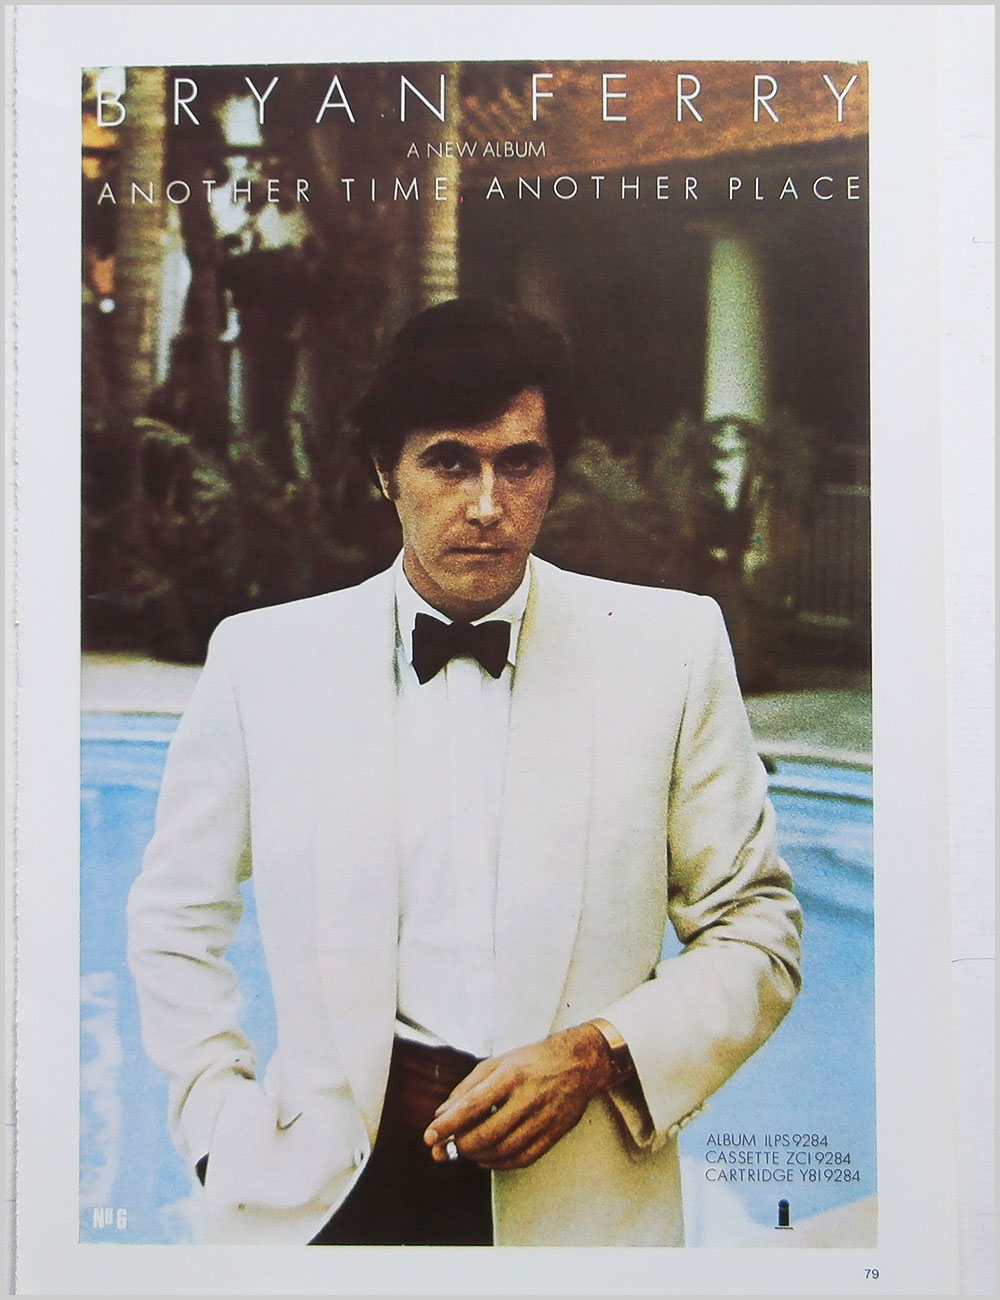 Bryan Ferry and Important - Rock Poster: Bryan Ferry: Another Time, Another Place b/w Important  (PB100313) 